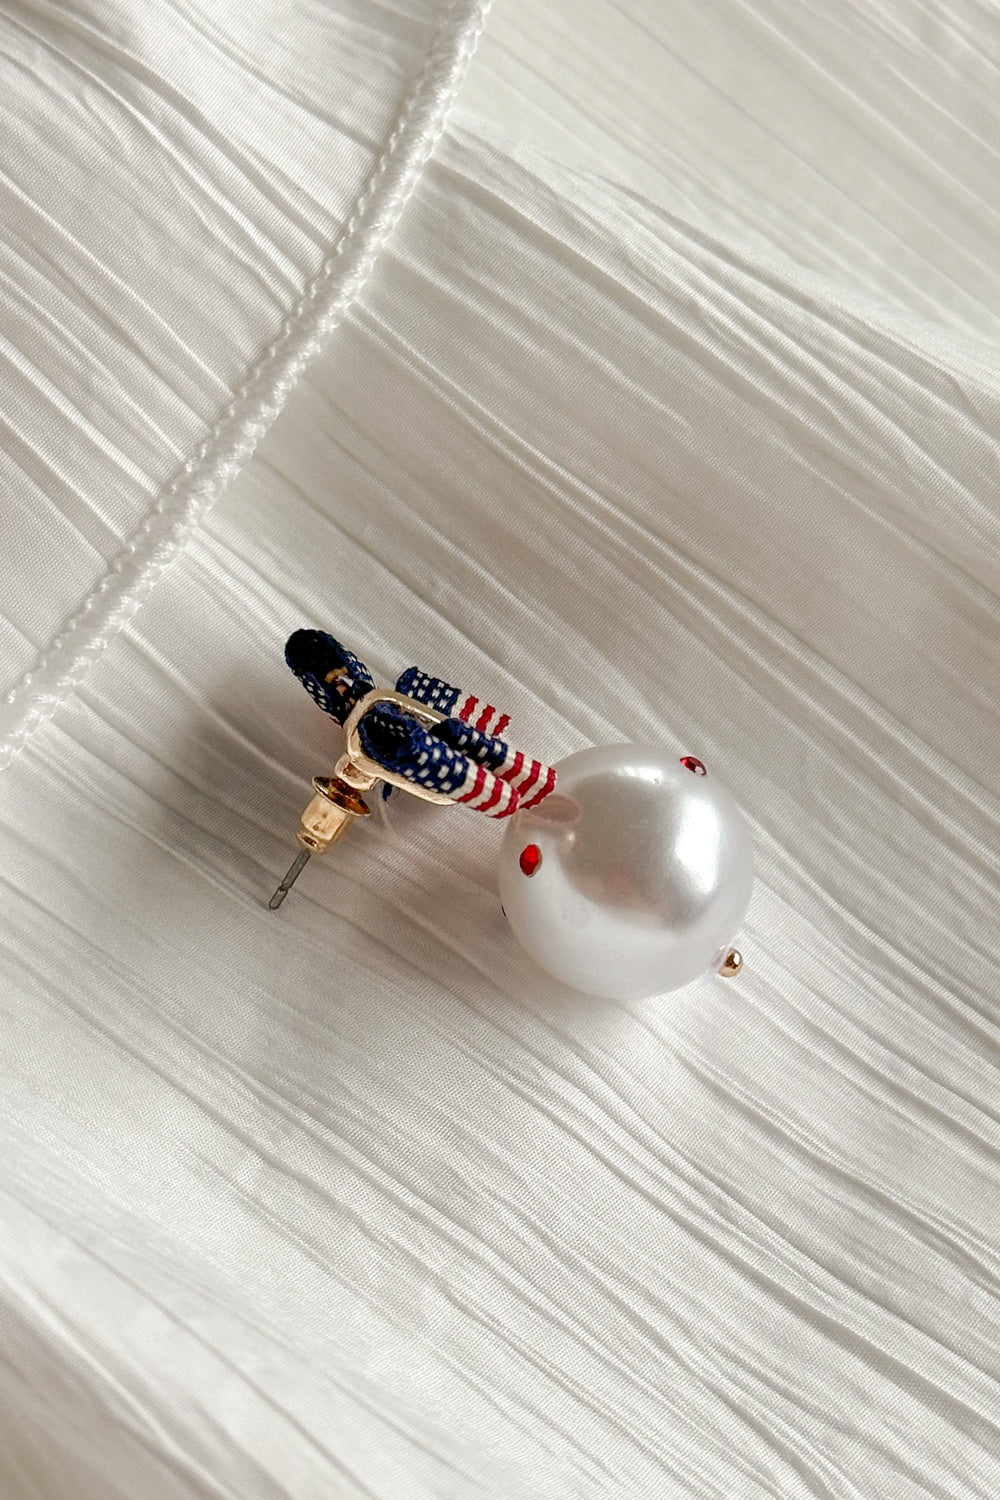 Close-up side view image of the Betsy Red, White, & Blue Pearl Earring against a white background. Earrings have american flag bows and a pearl pendant with red white and blue stones.